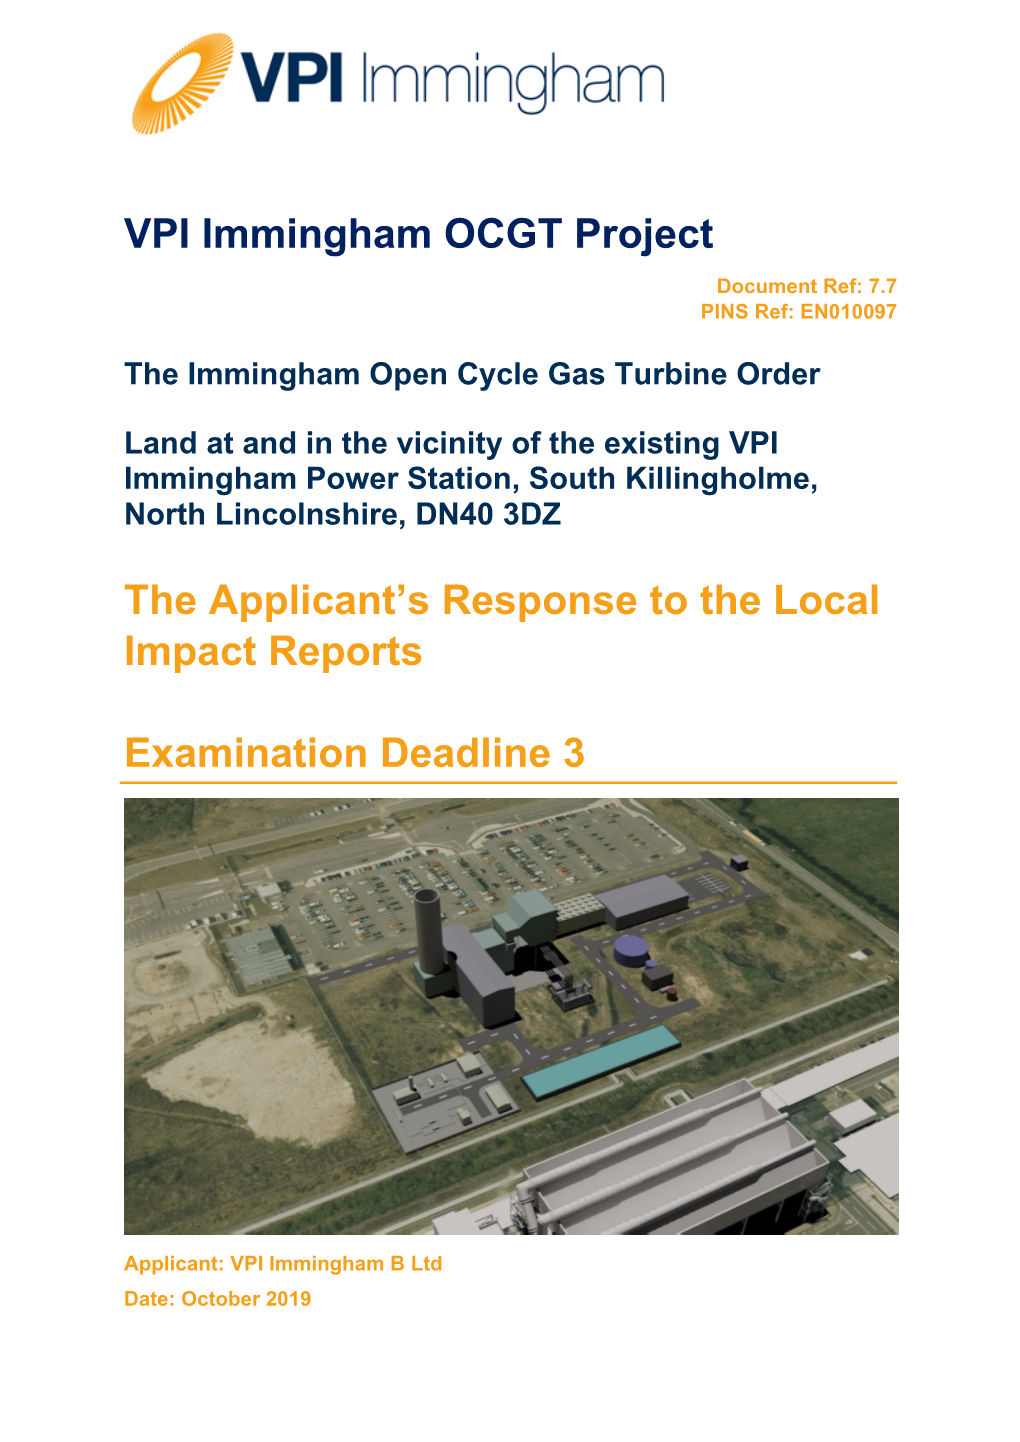 VPI Immingham OCGT Project the Applicant's Response to the Local